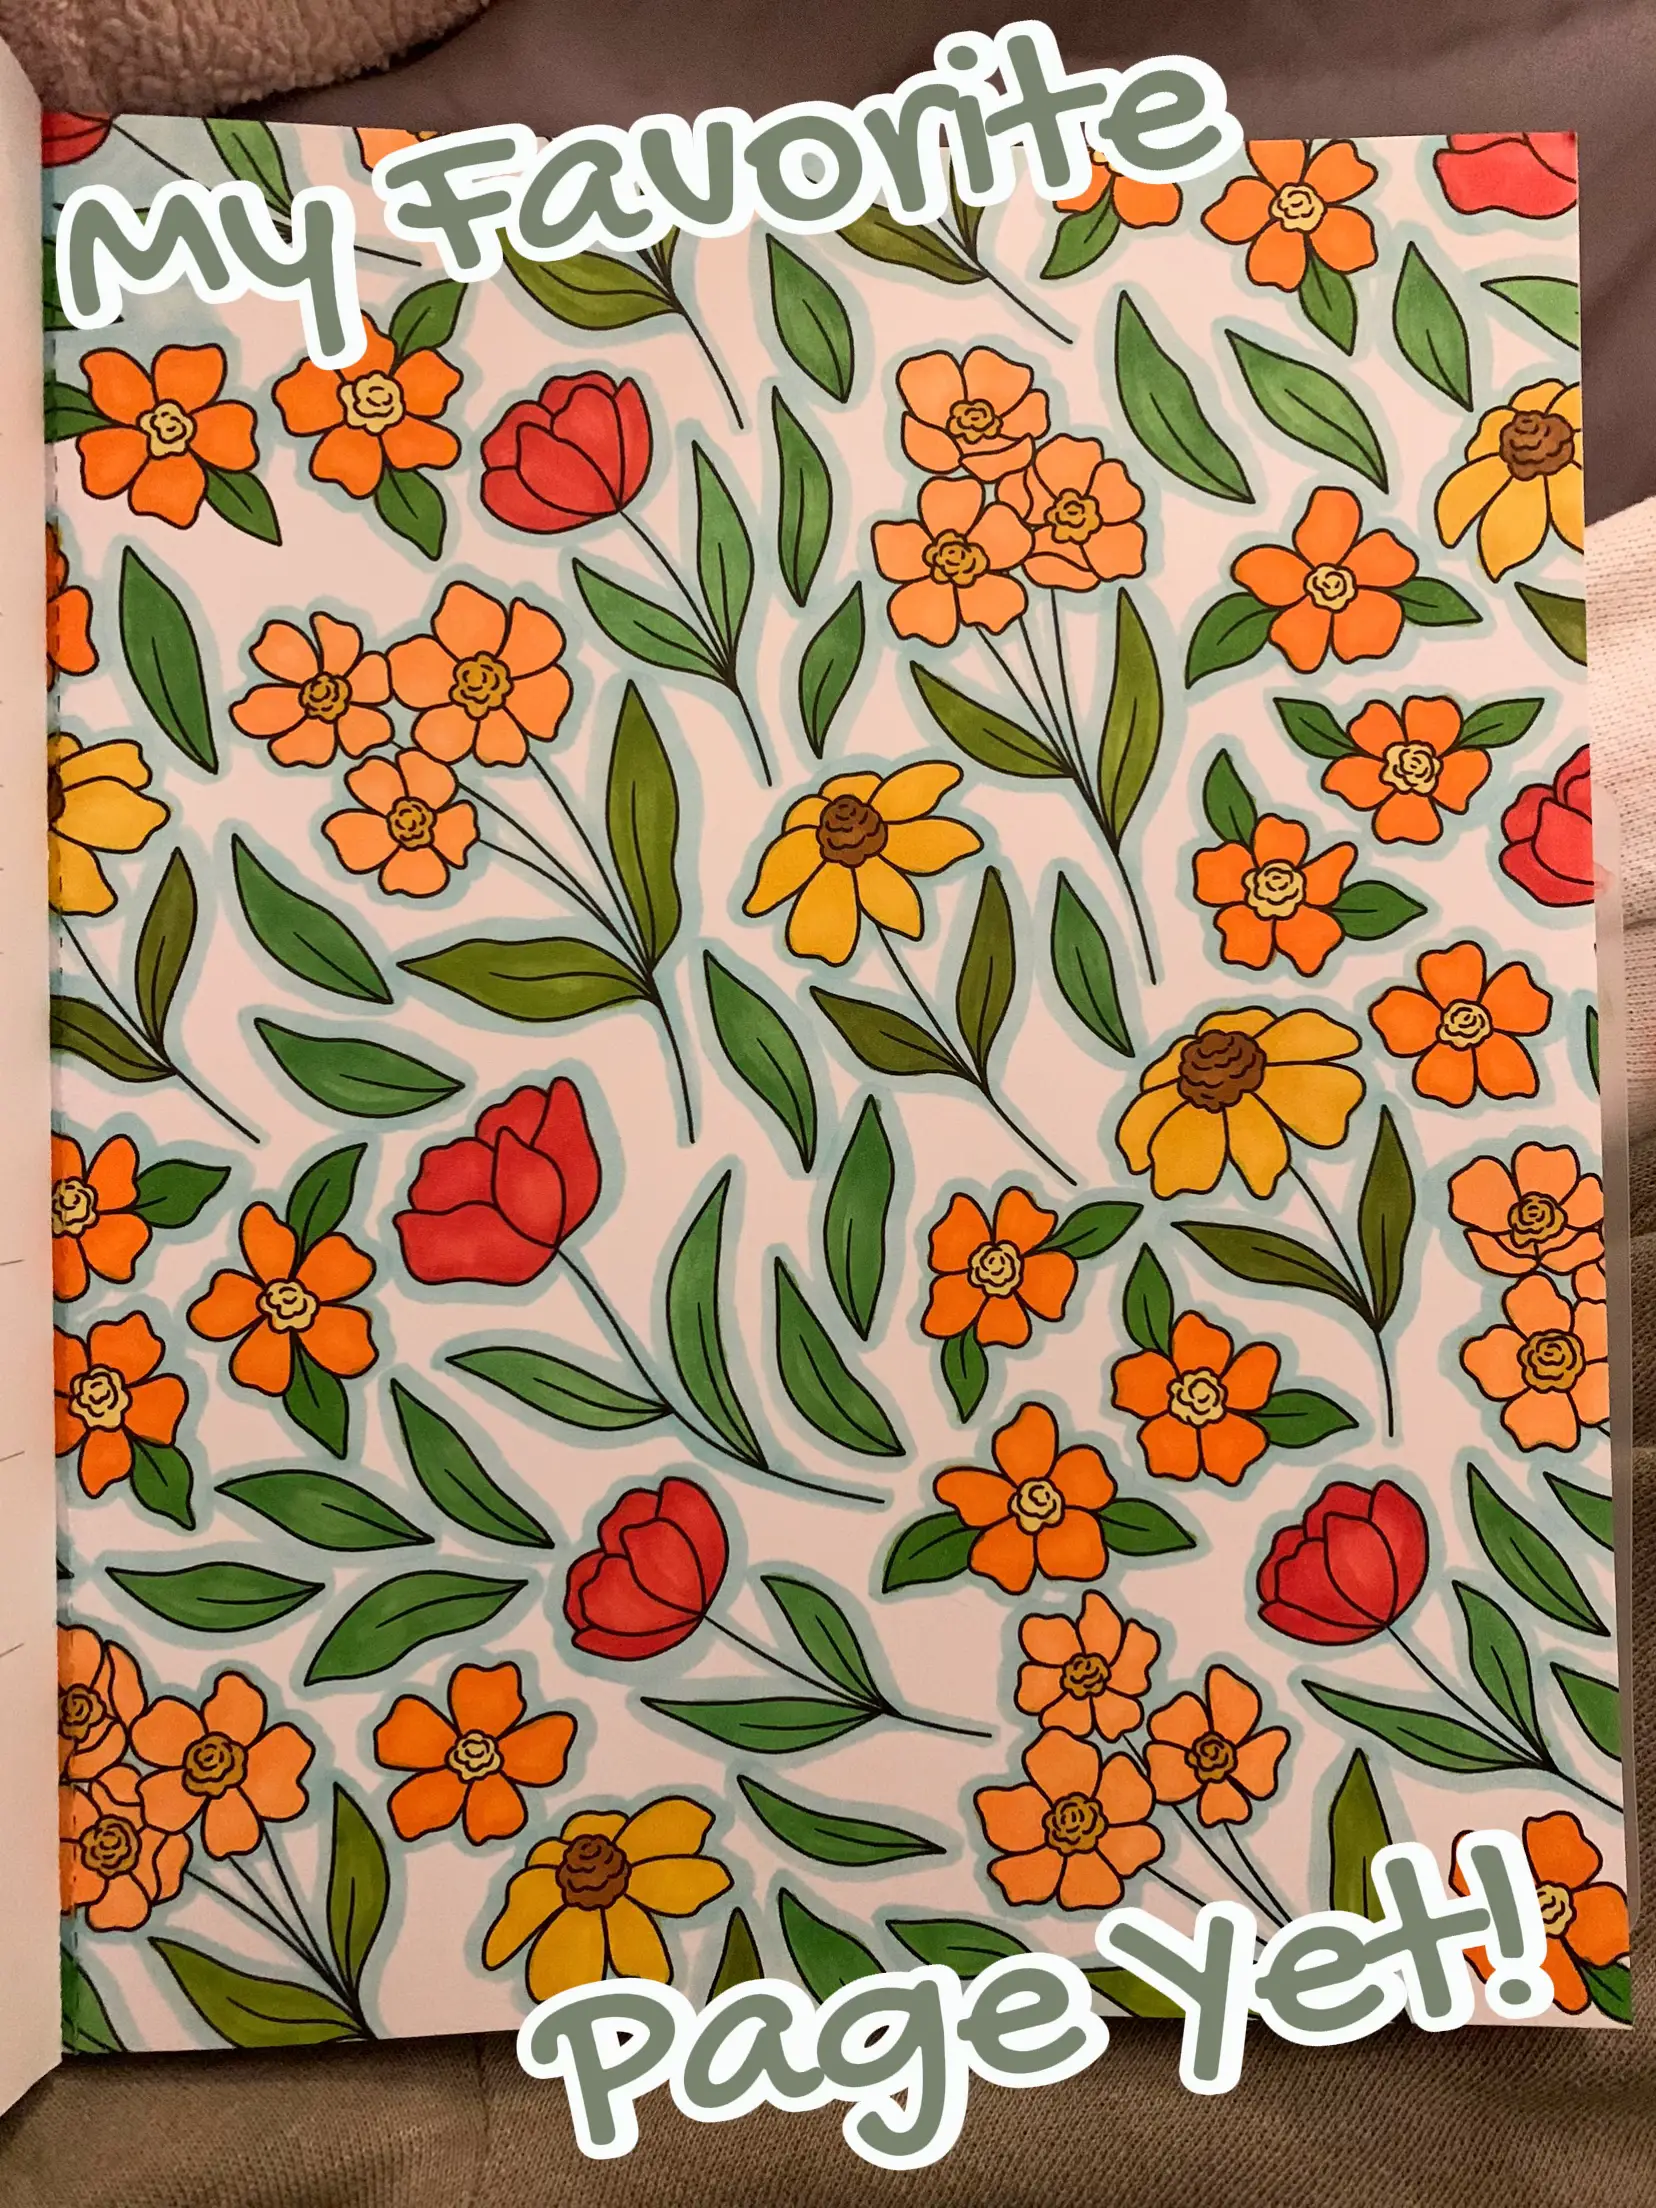 101 relaxing flowers coloring book: Adult Coloring Book Containing  Beautiful Flowers For Stress Relief, Relaxation, Mindfulness, and Anxiety:  adult